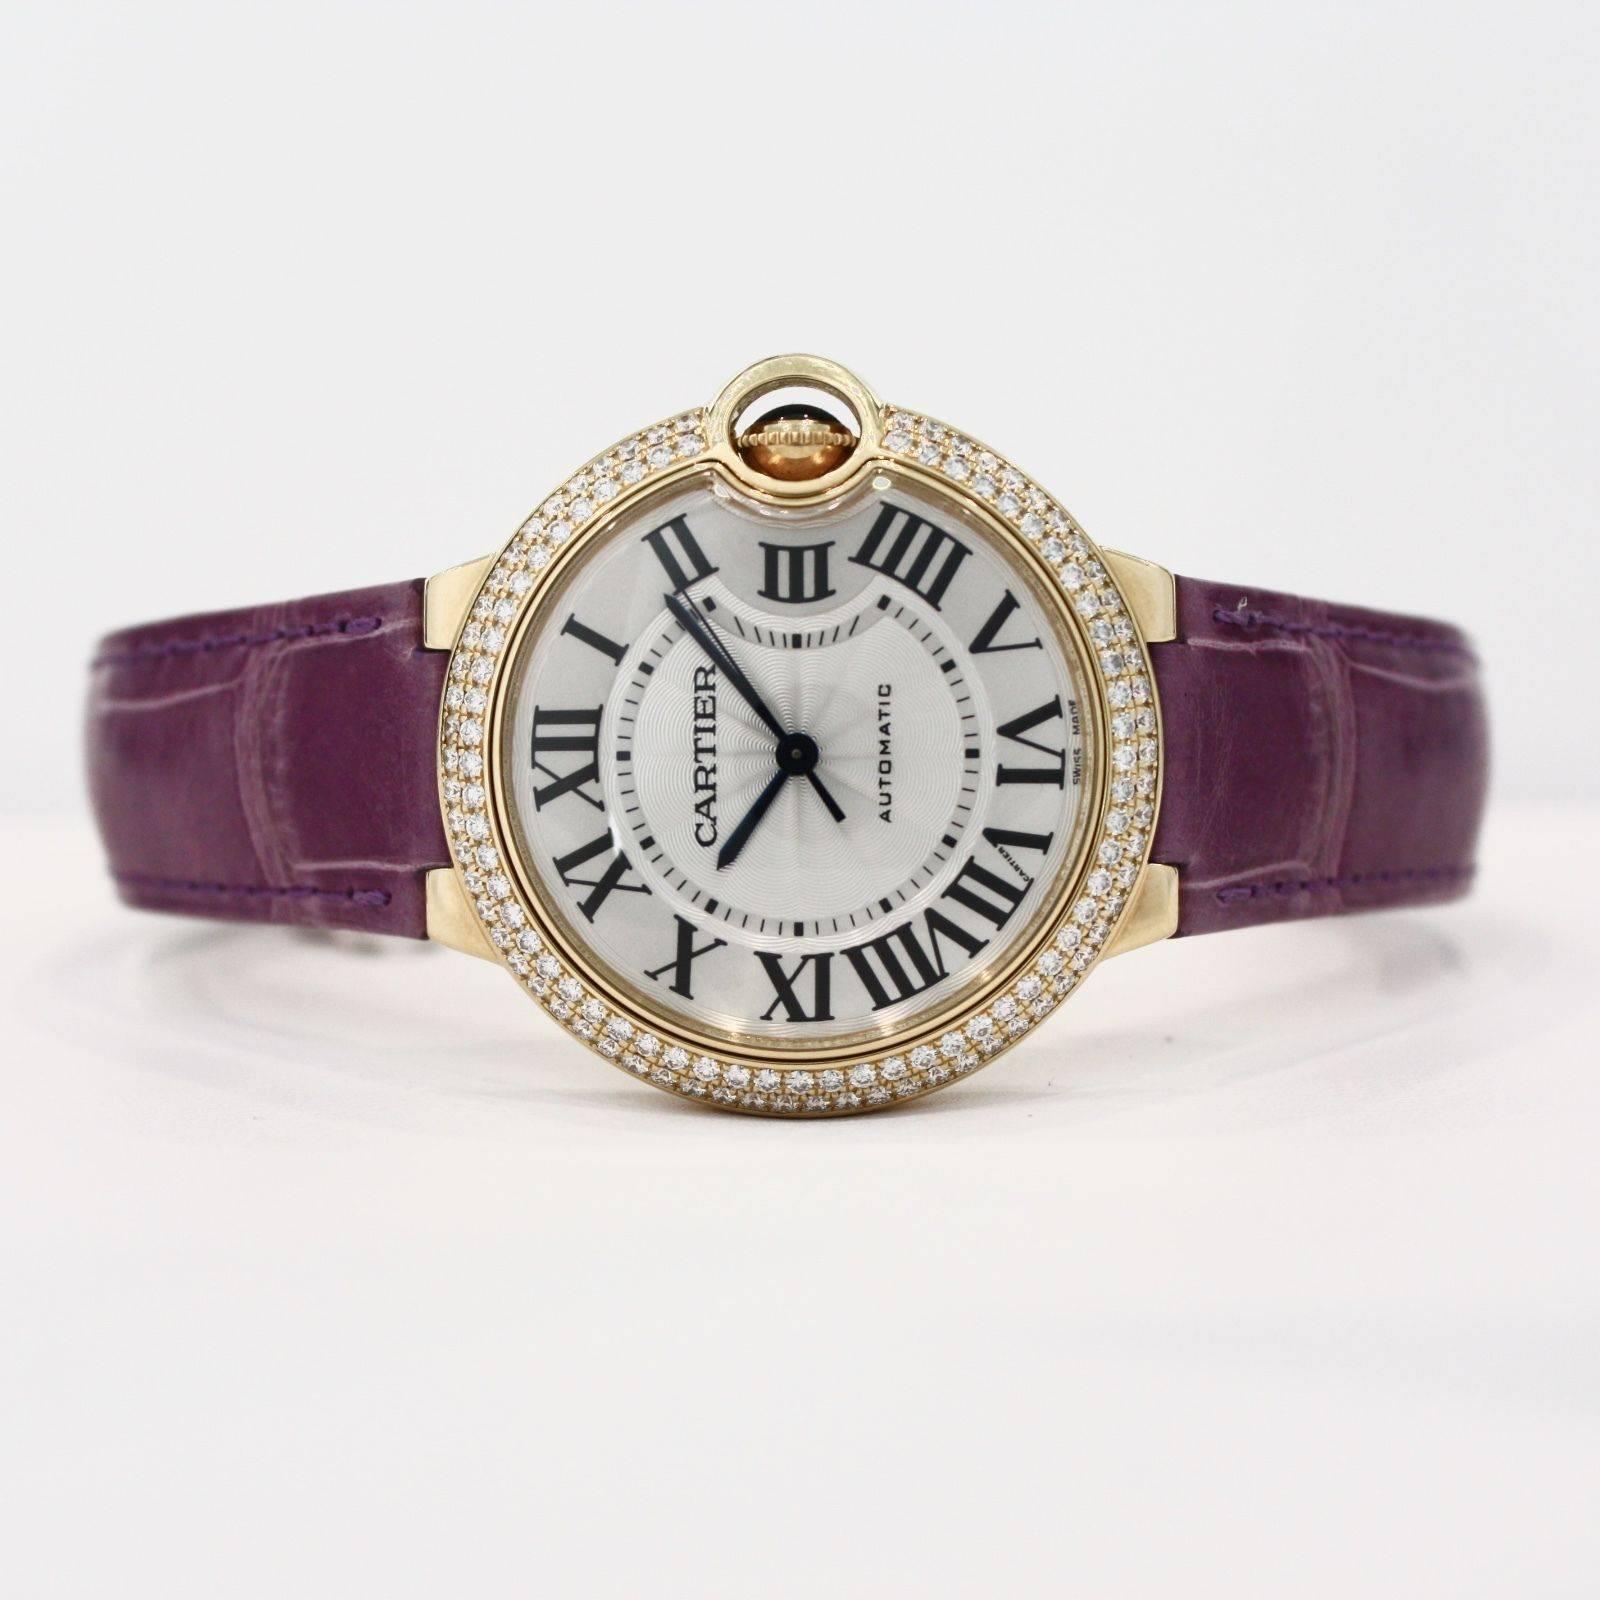 Brand Name: Cartier
Style Number: WE900451
Series: Ballon Bleu
Gender: Ladies
Case Material: 18k Yellow Gold
Dial Color: Silvered Guilloche
Movement: Automatic
Functions: Hours, Minutes, seconds
Crystal Material: Sapphire
Case Diameter: